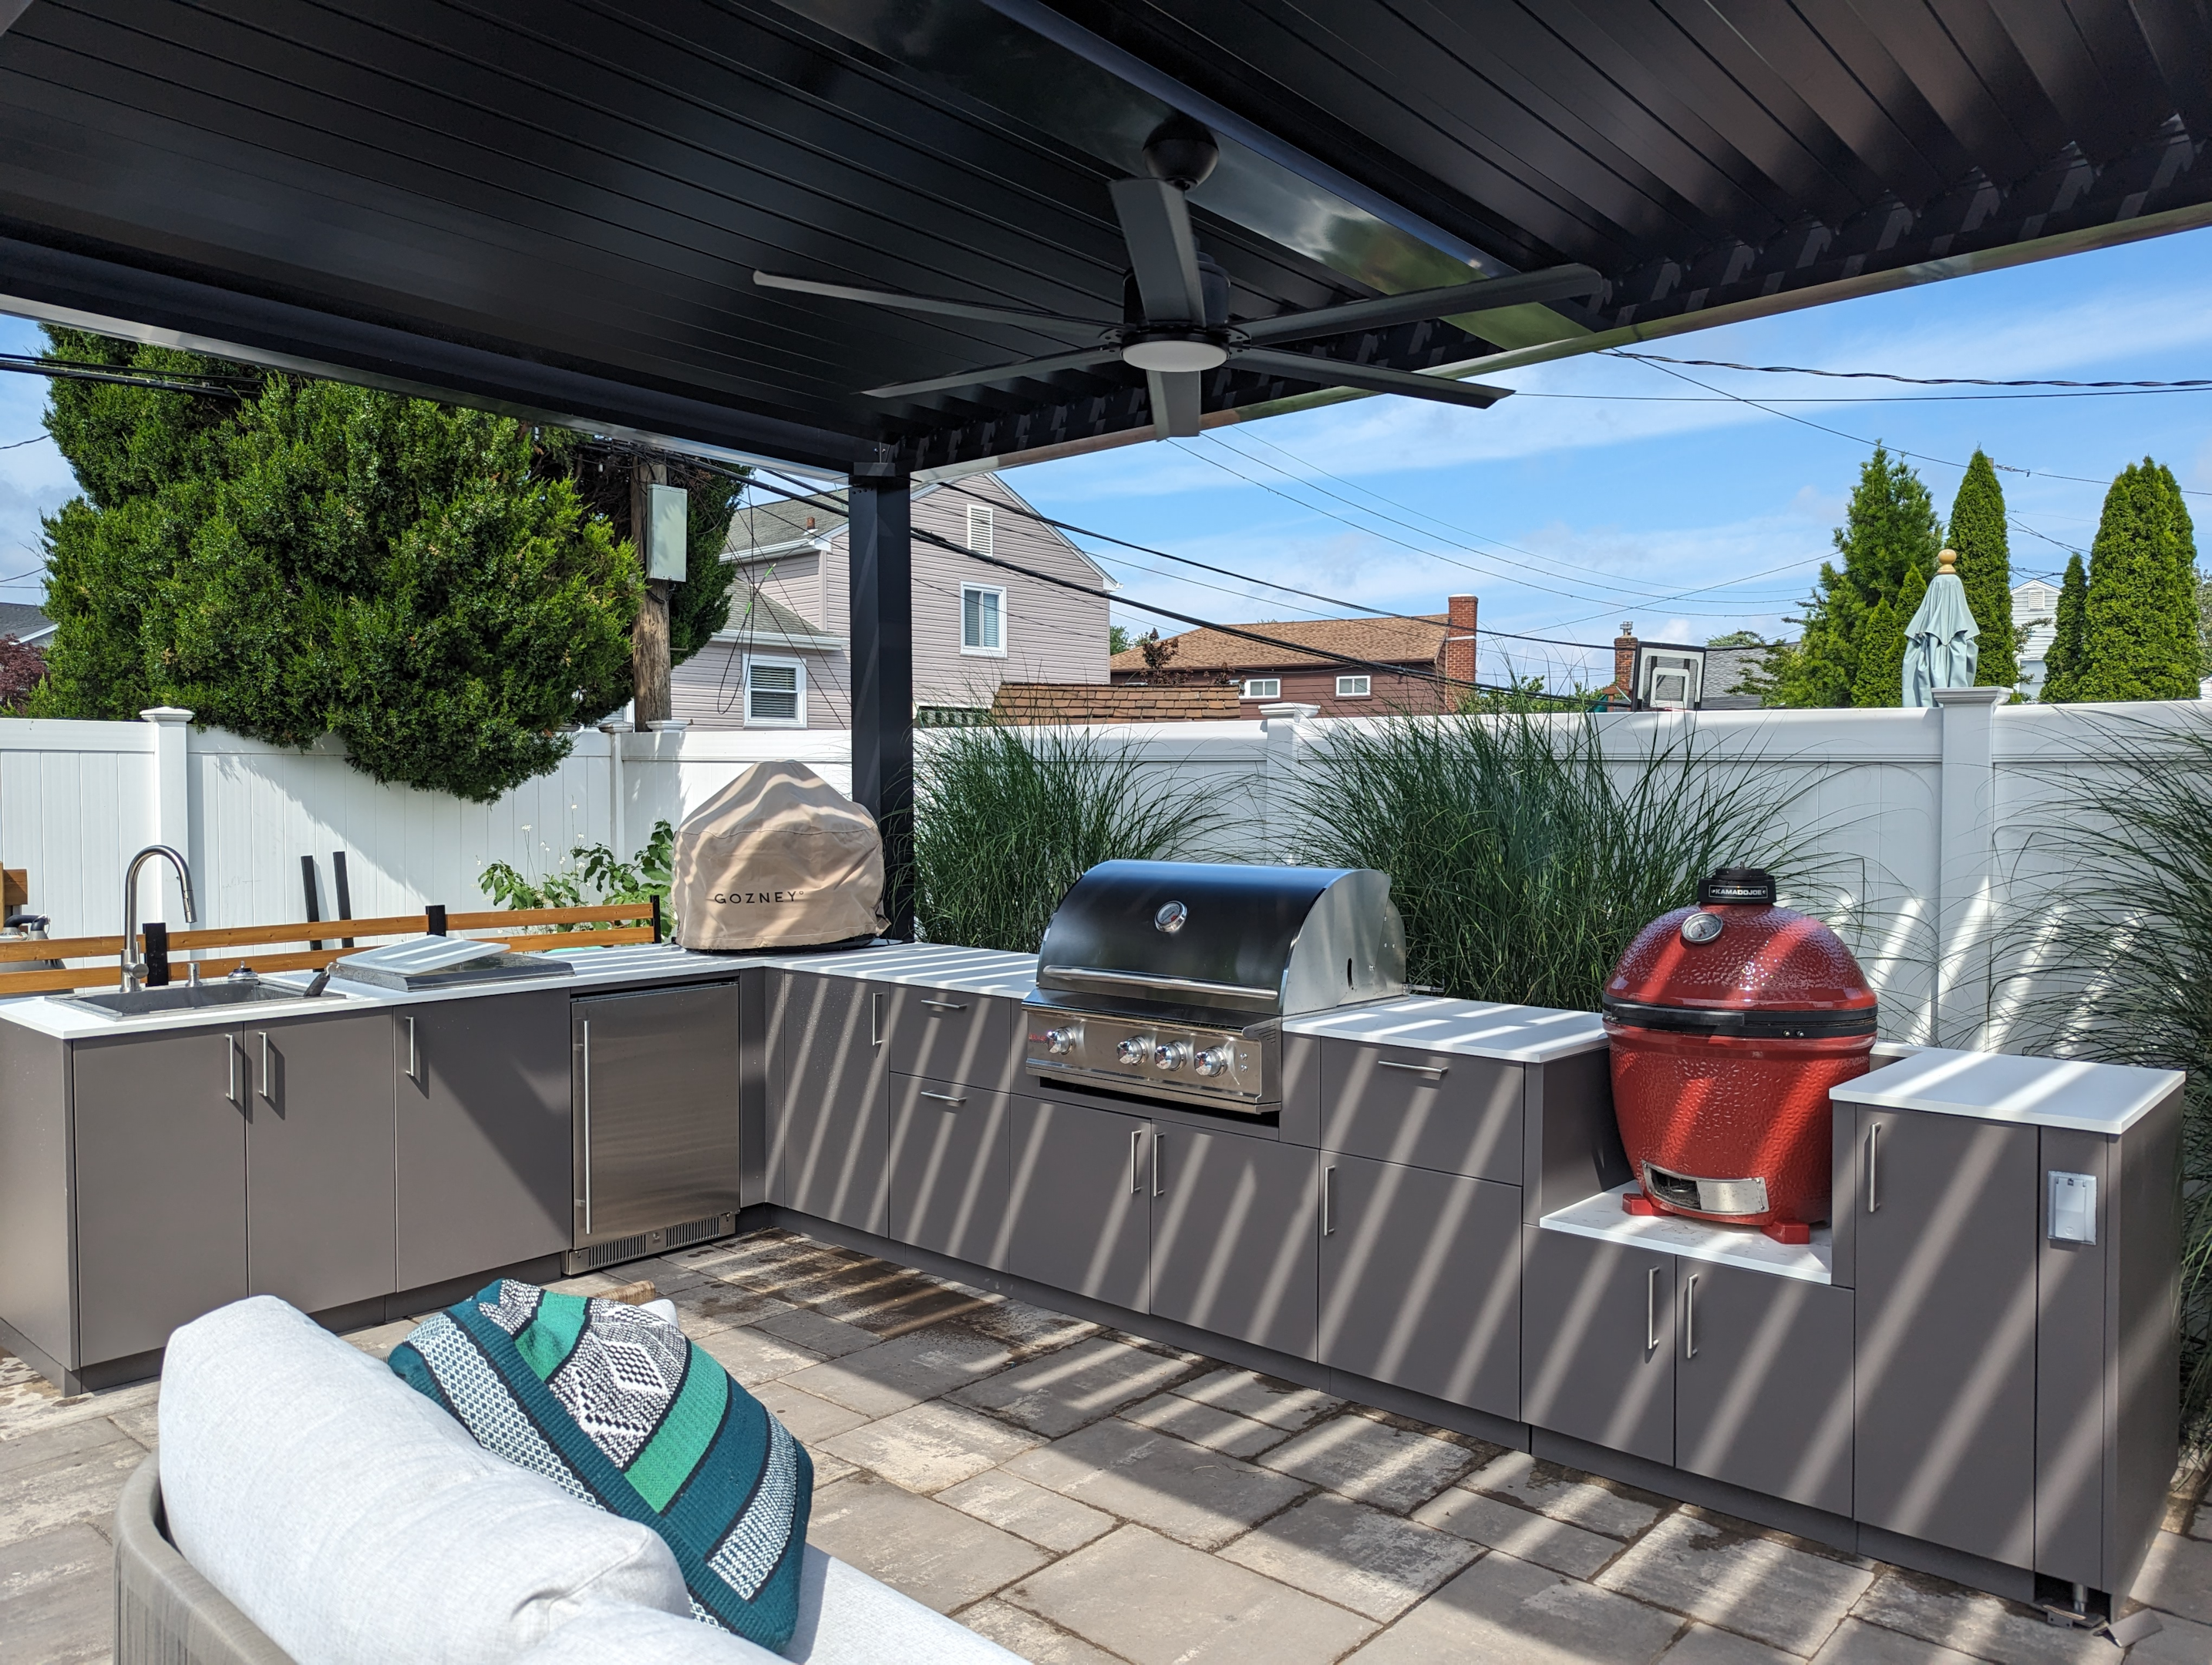 Outdoor Kitchen room with pergola create shade from the summer sun with grill on patio